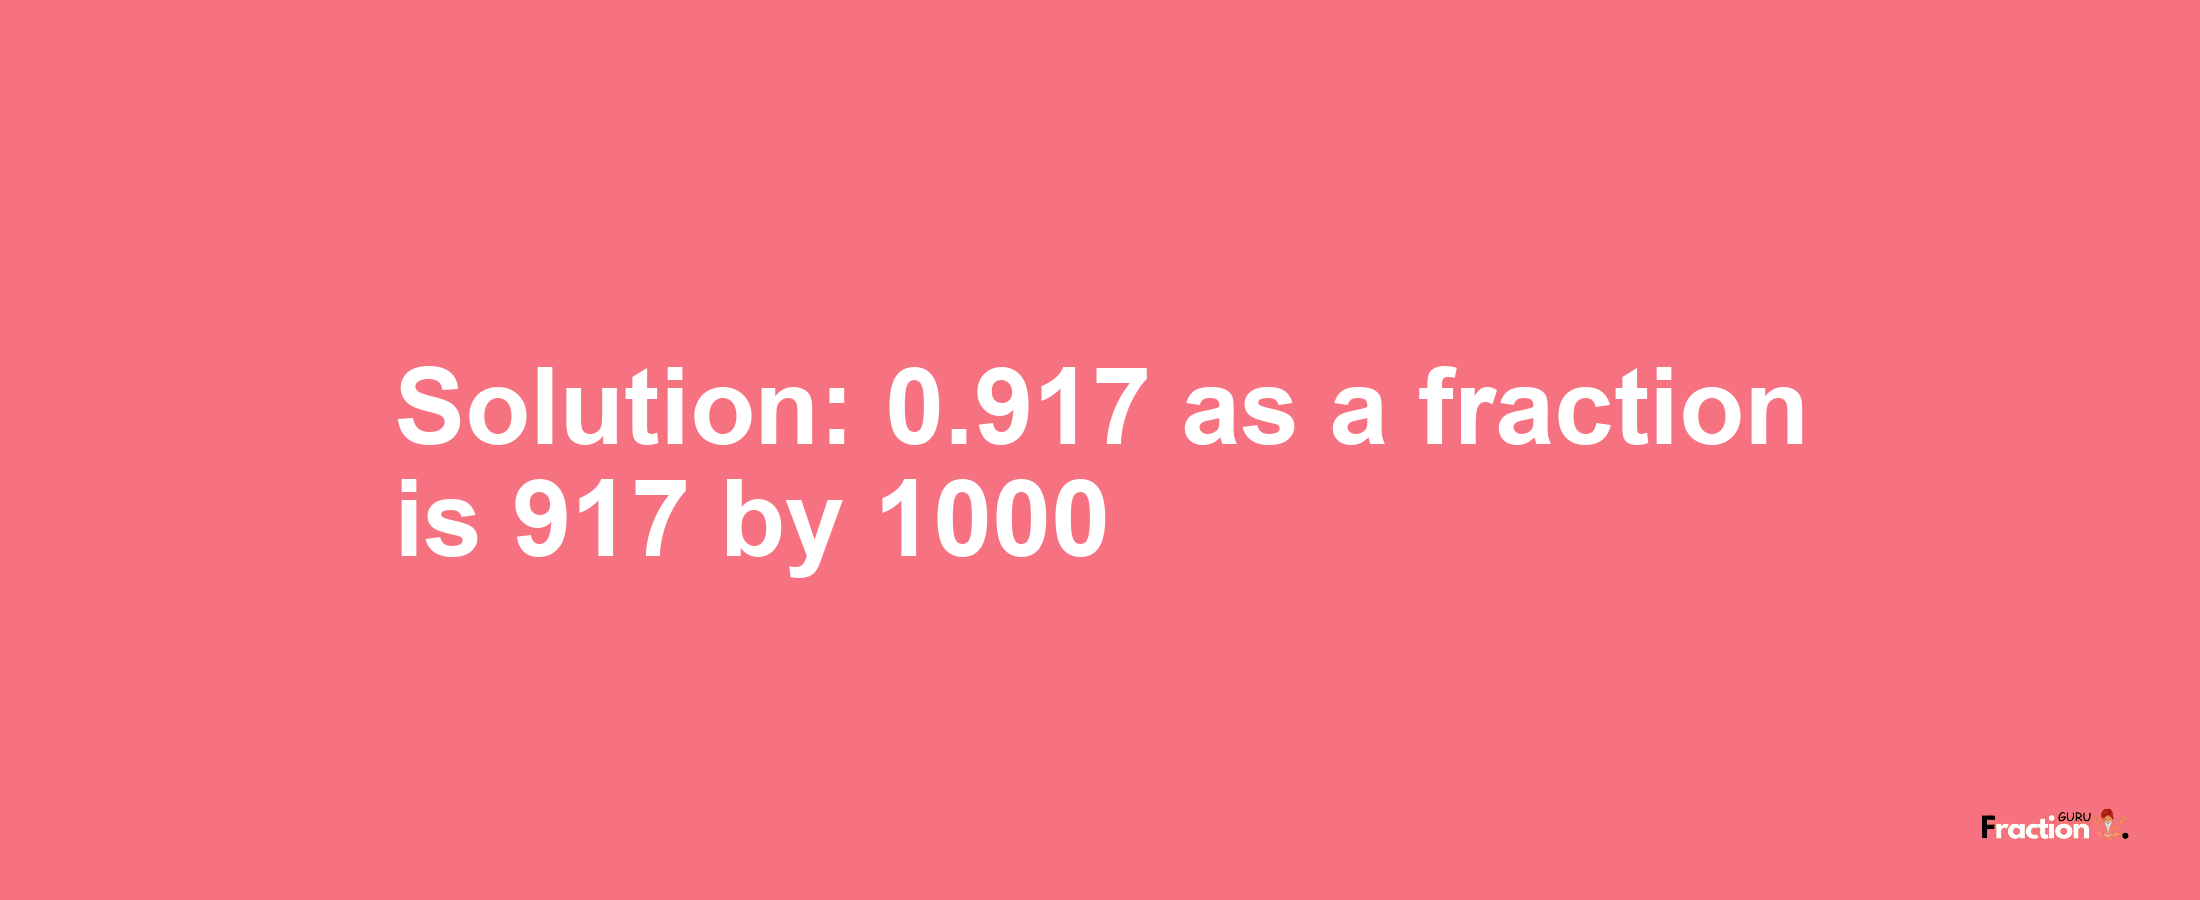 Solution:0.917 as a fraction is 917/1000